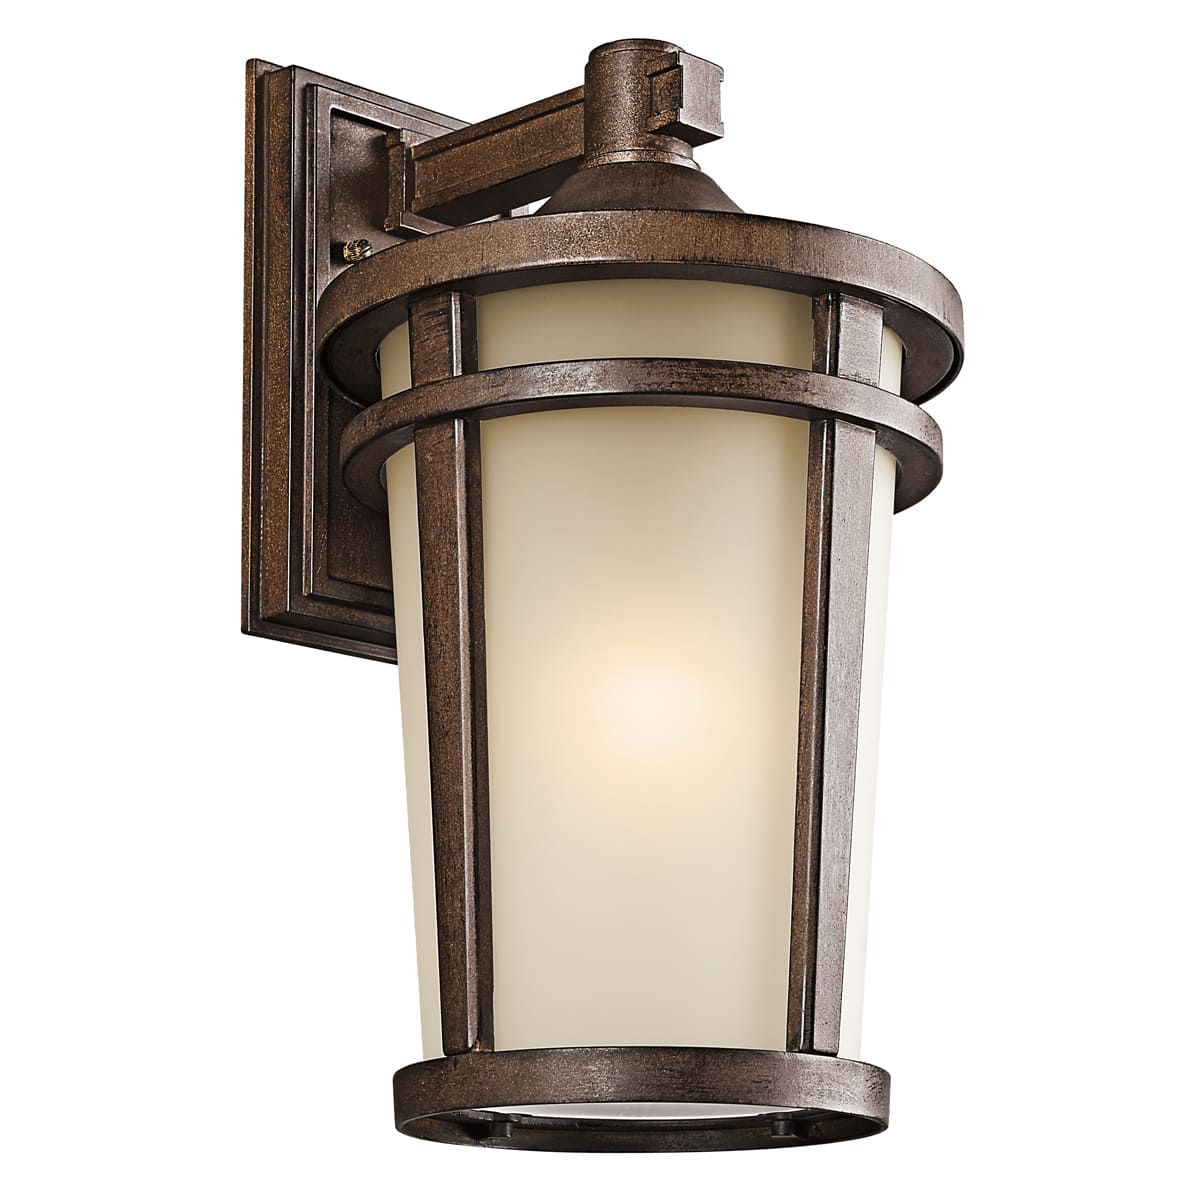 49073BST Brown Stone Atwood Collection 1 Light 18" Outdoor Wall Light LightingDirect.com